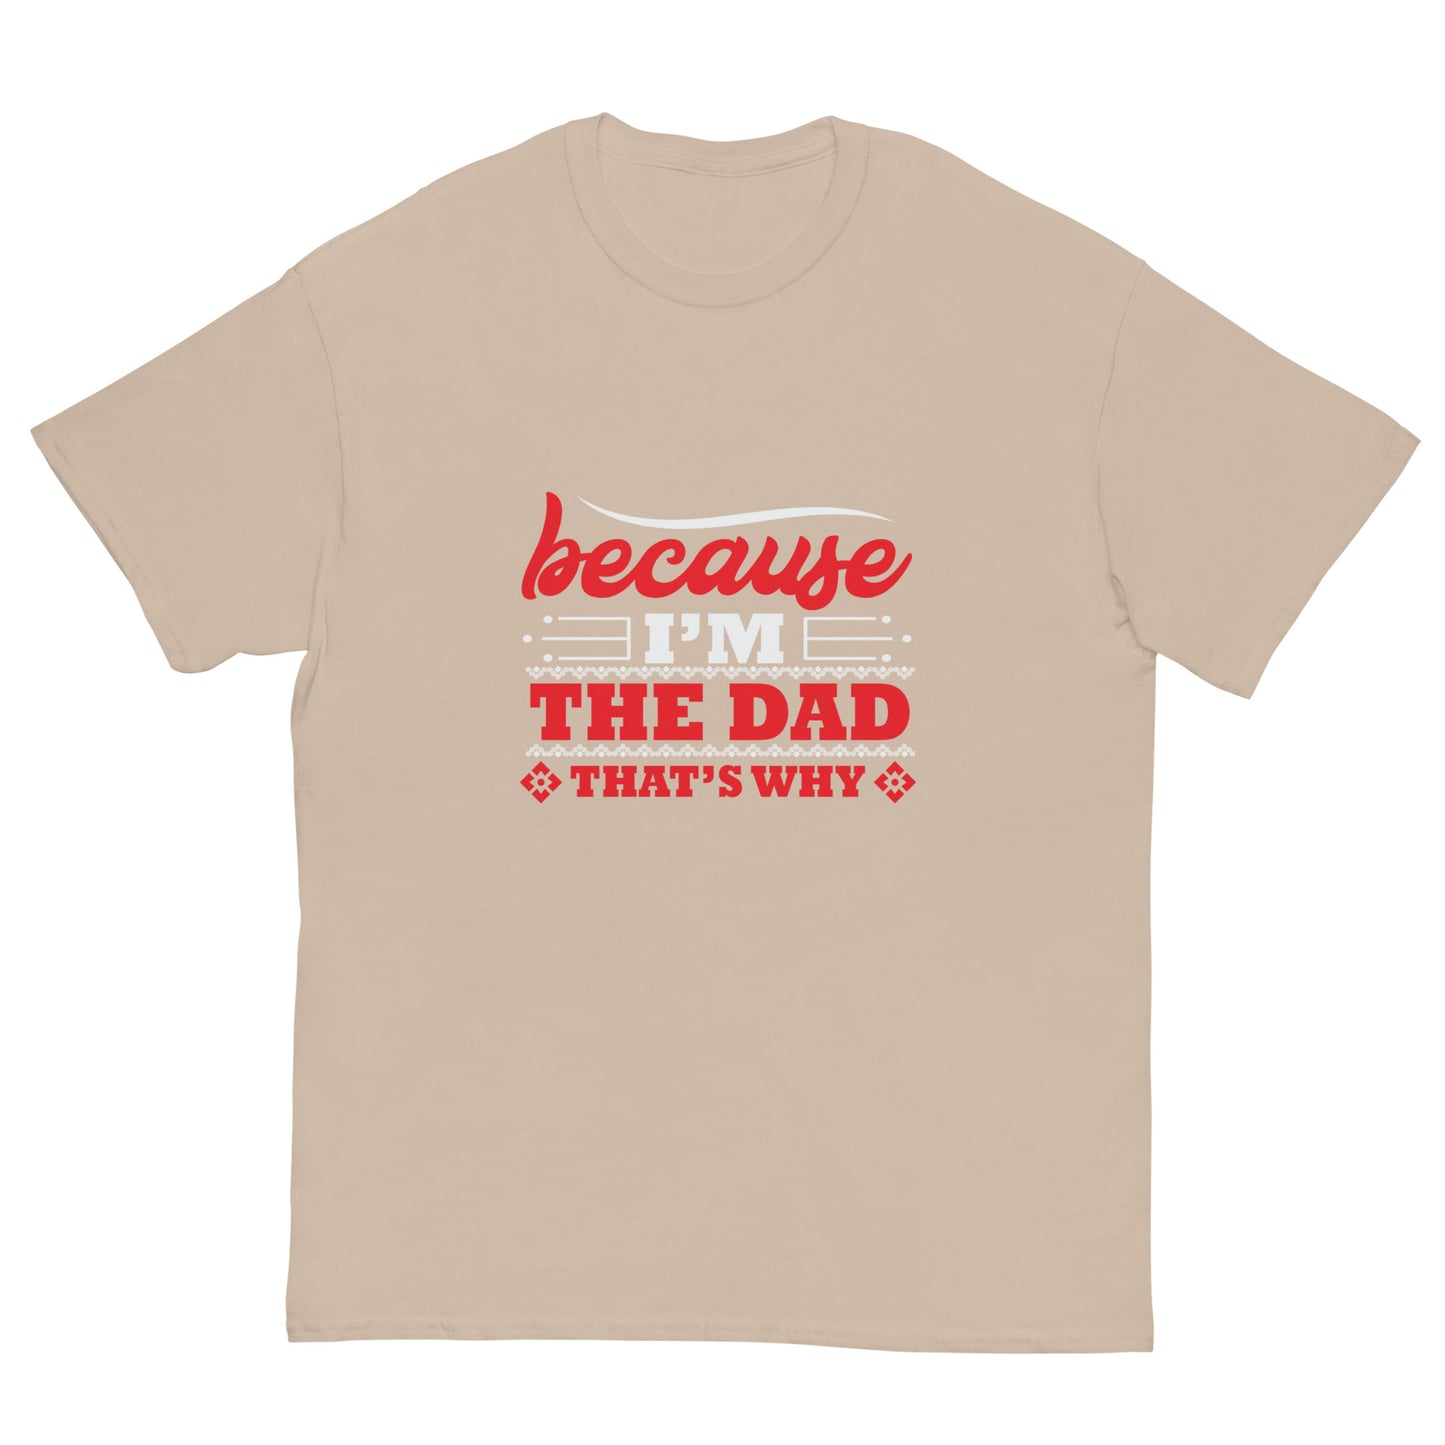 Men's classic tee "Because I'm The Dad - That's Why"